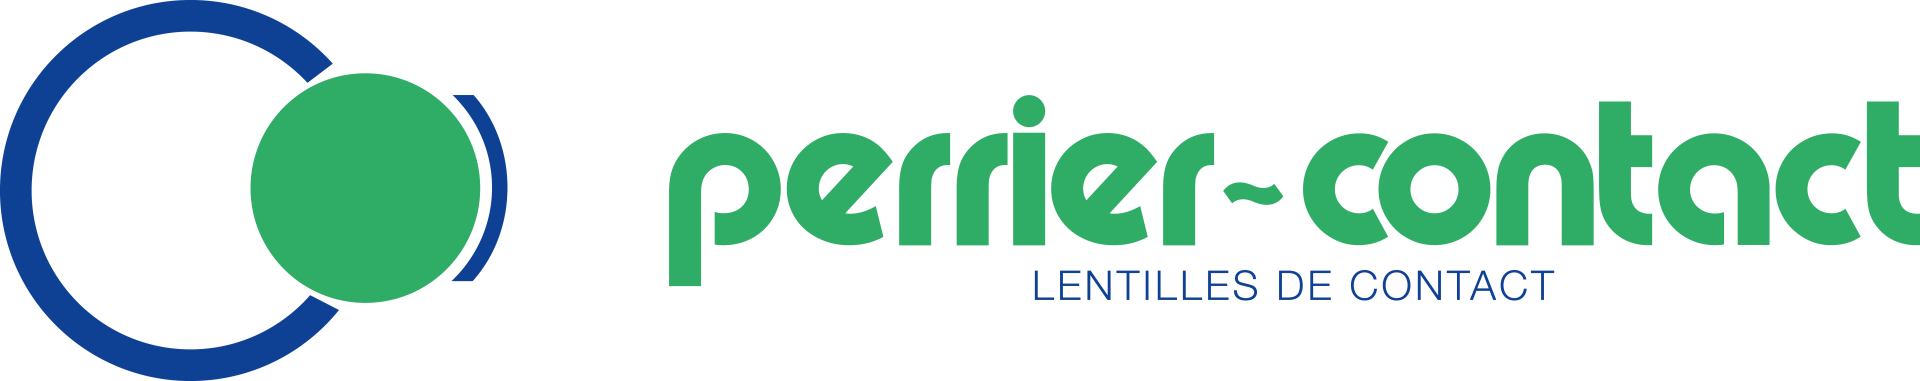 Perrier Contact